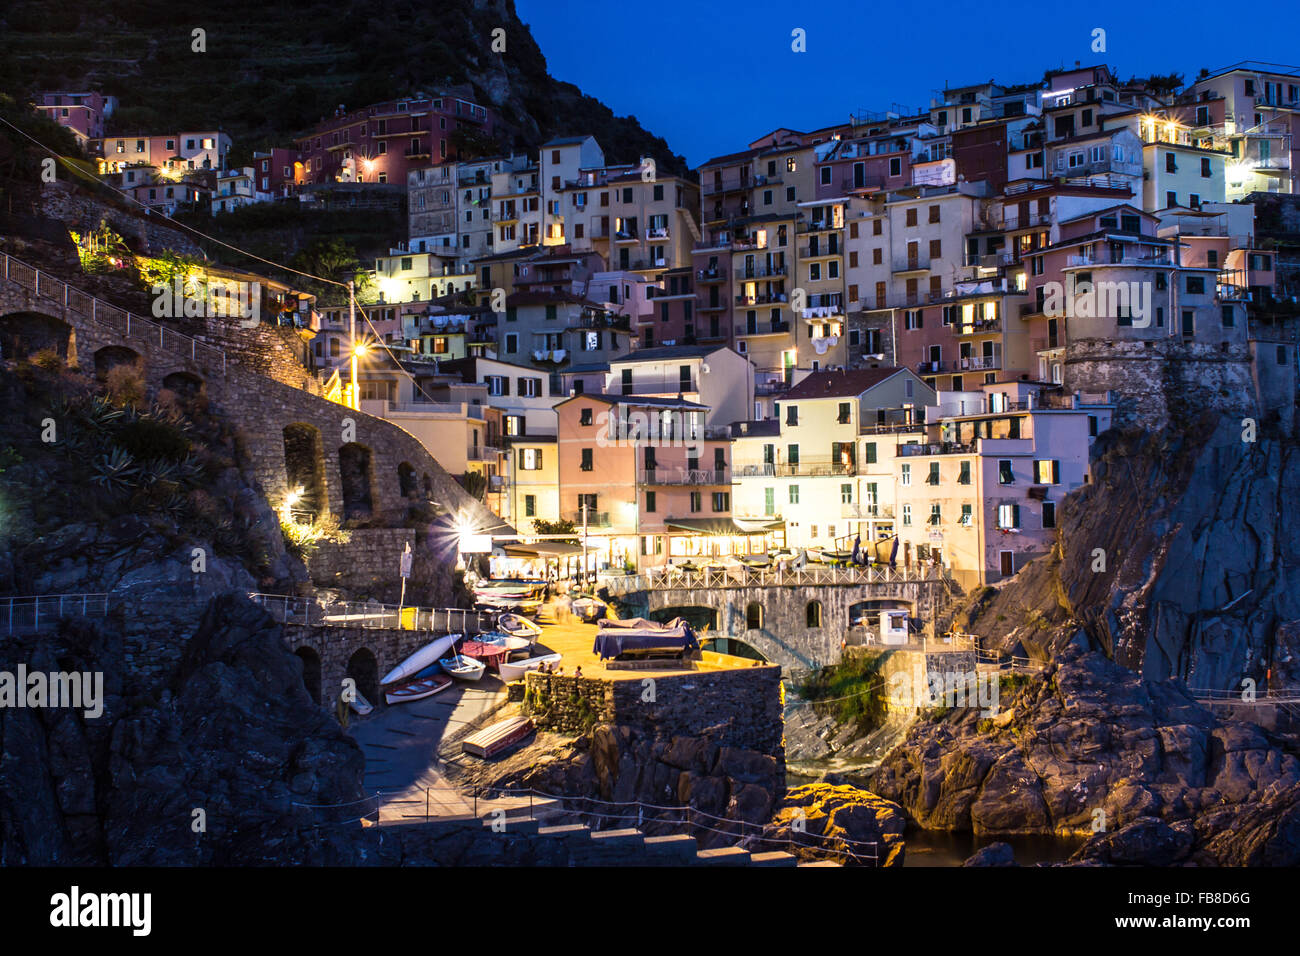 The small town of Manarola in Italy at night Stock Photo